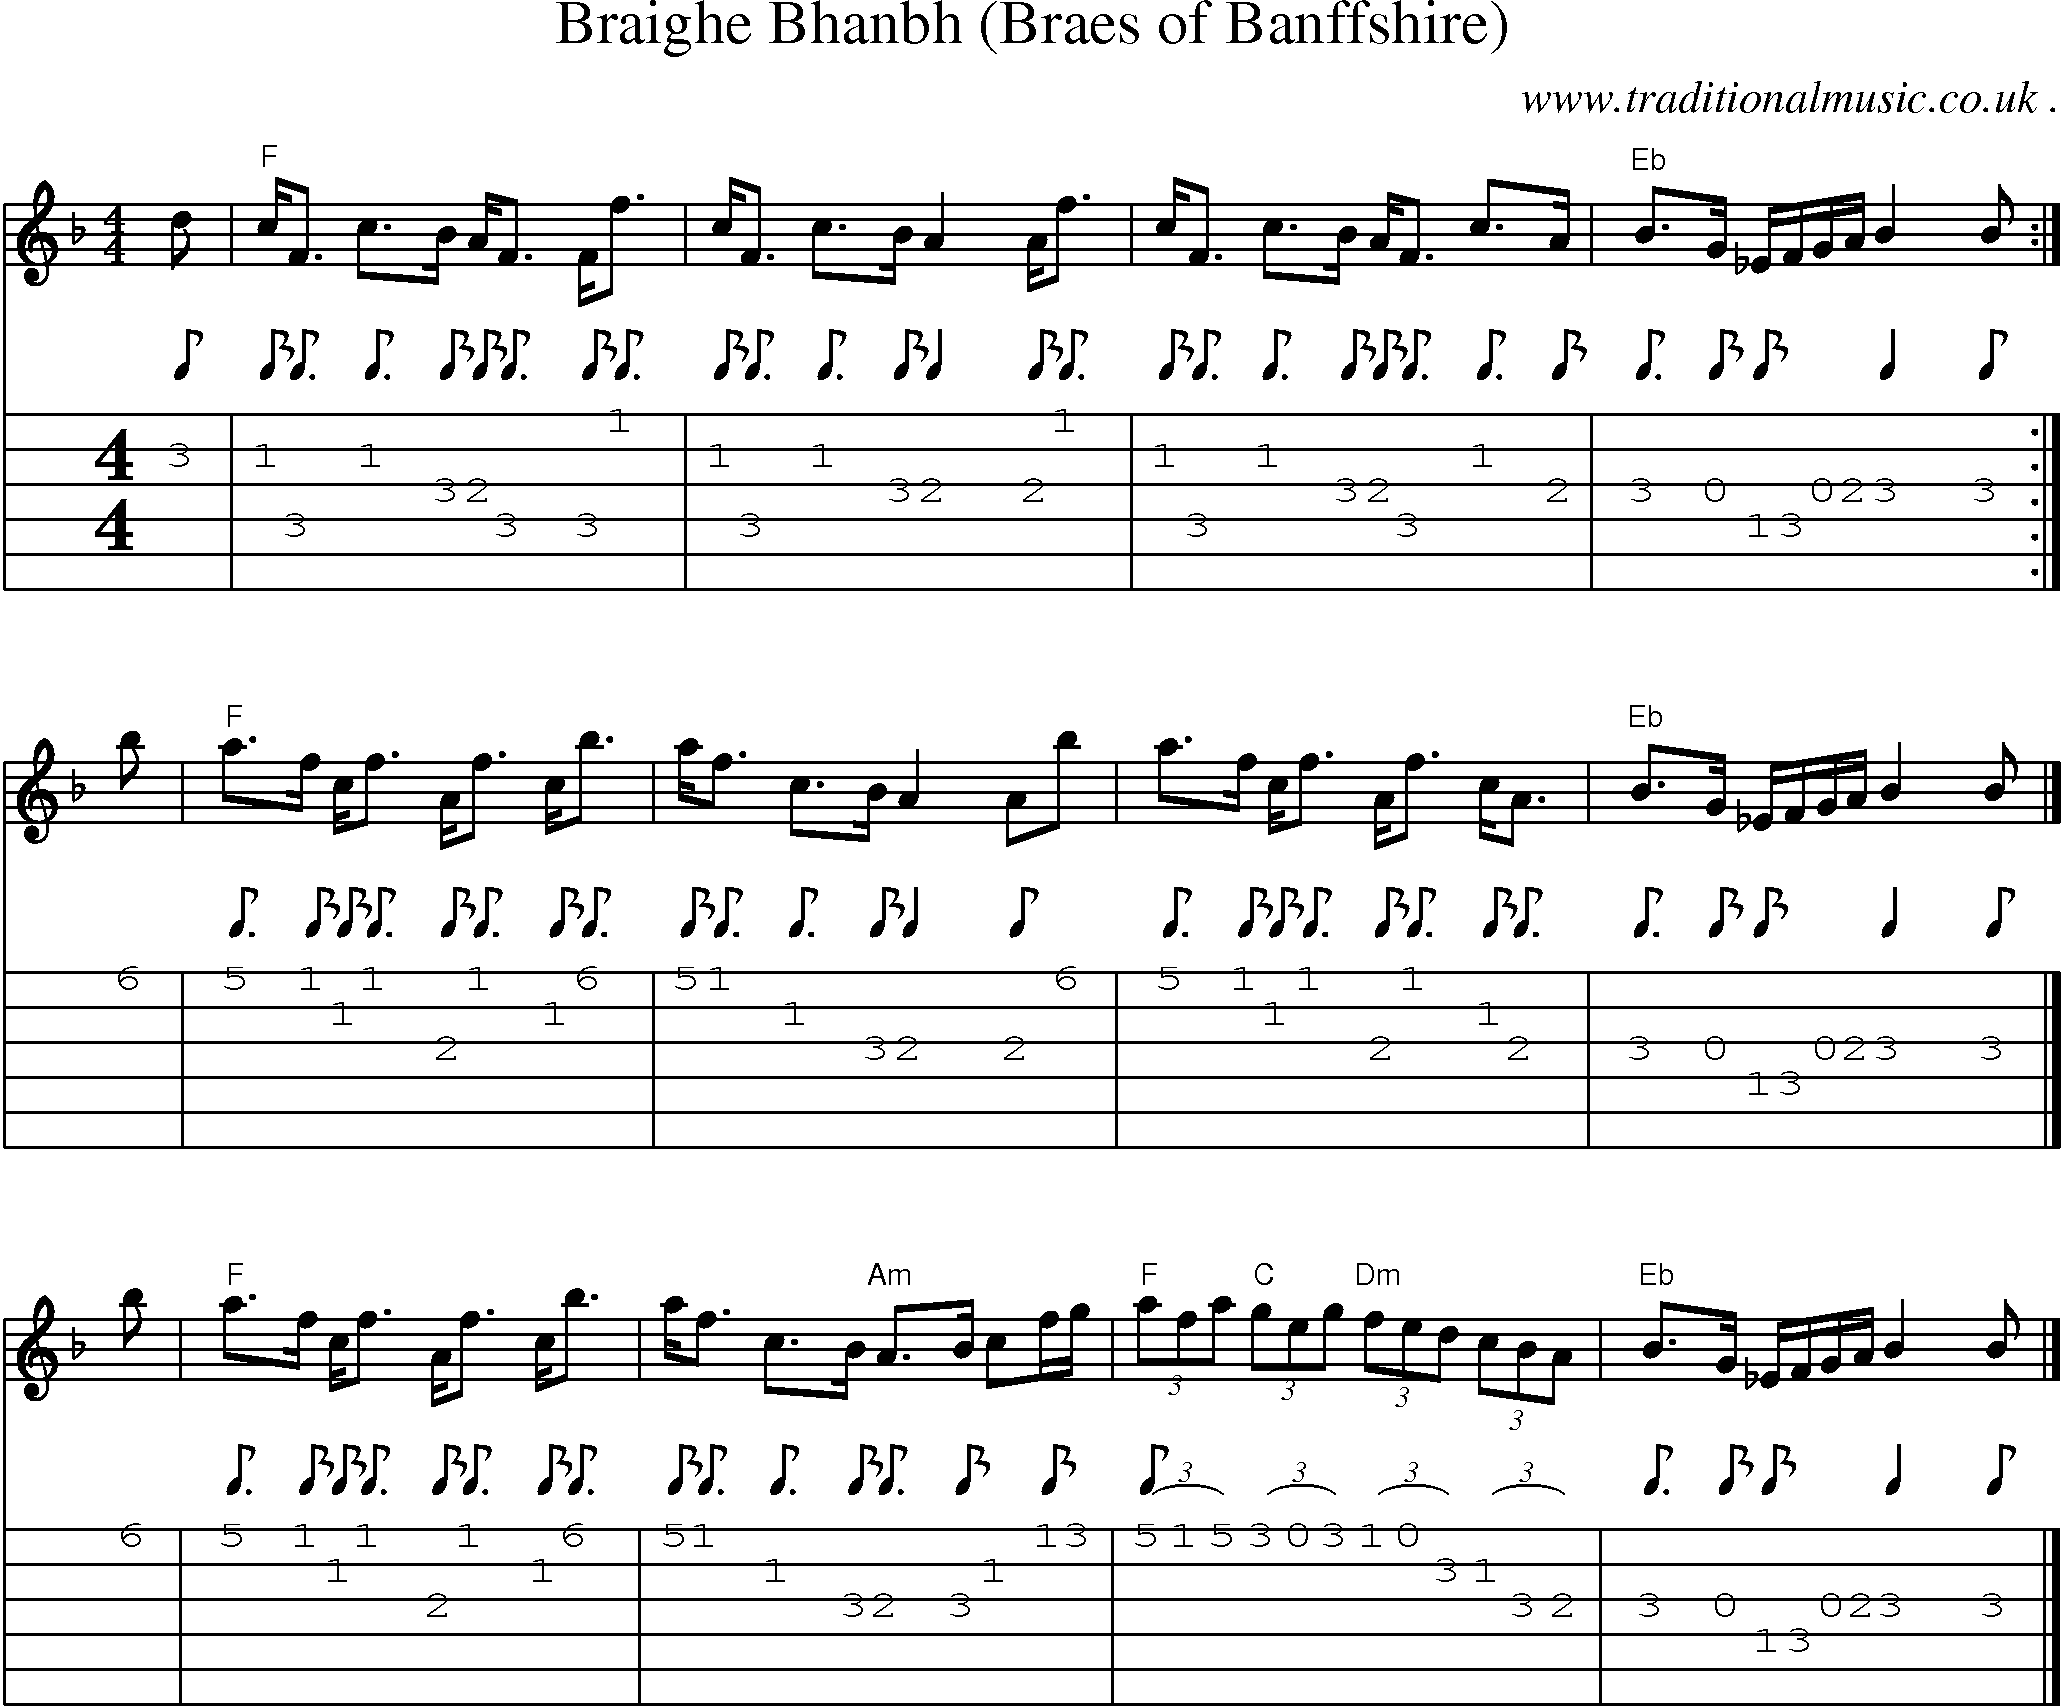 Sheet-music  score, Chords and Guitar Tabs for Braighe Bhanbh Braes Of Banffshire